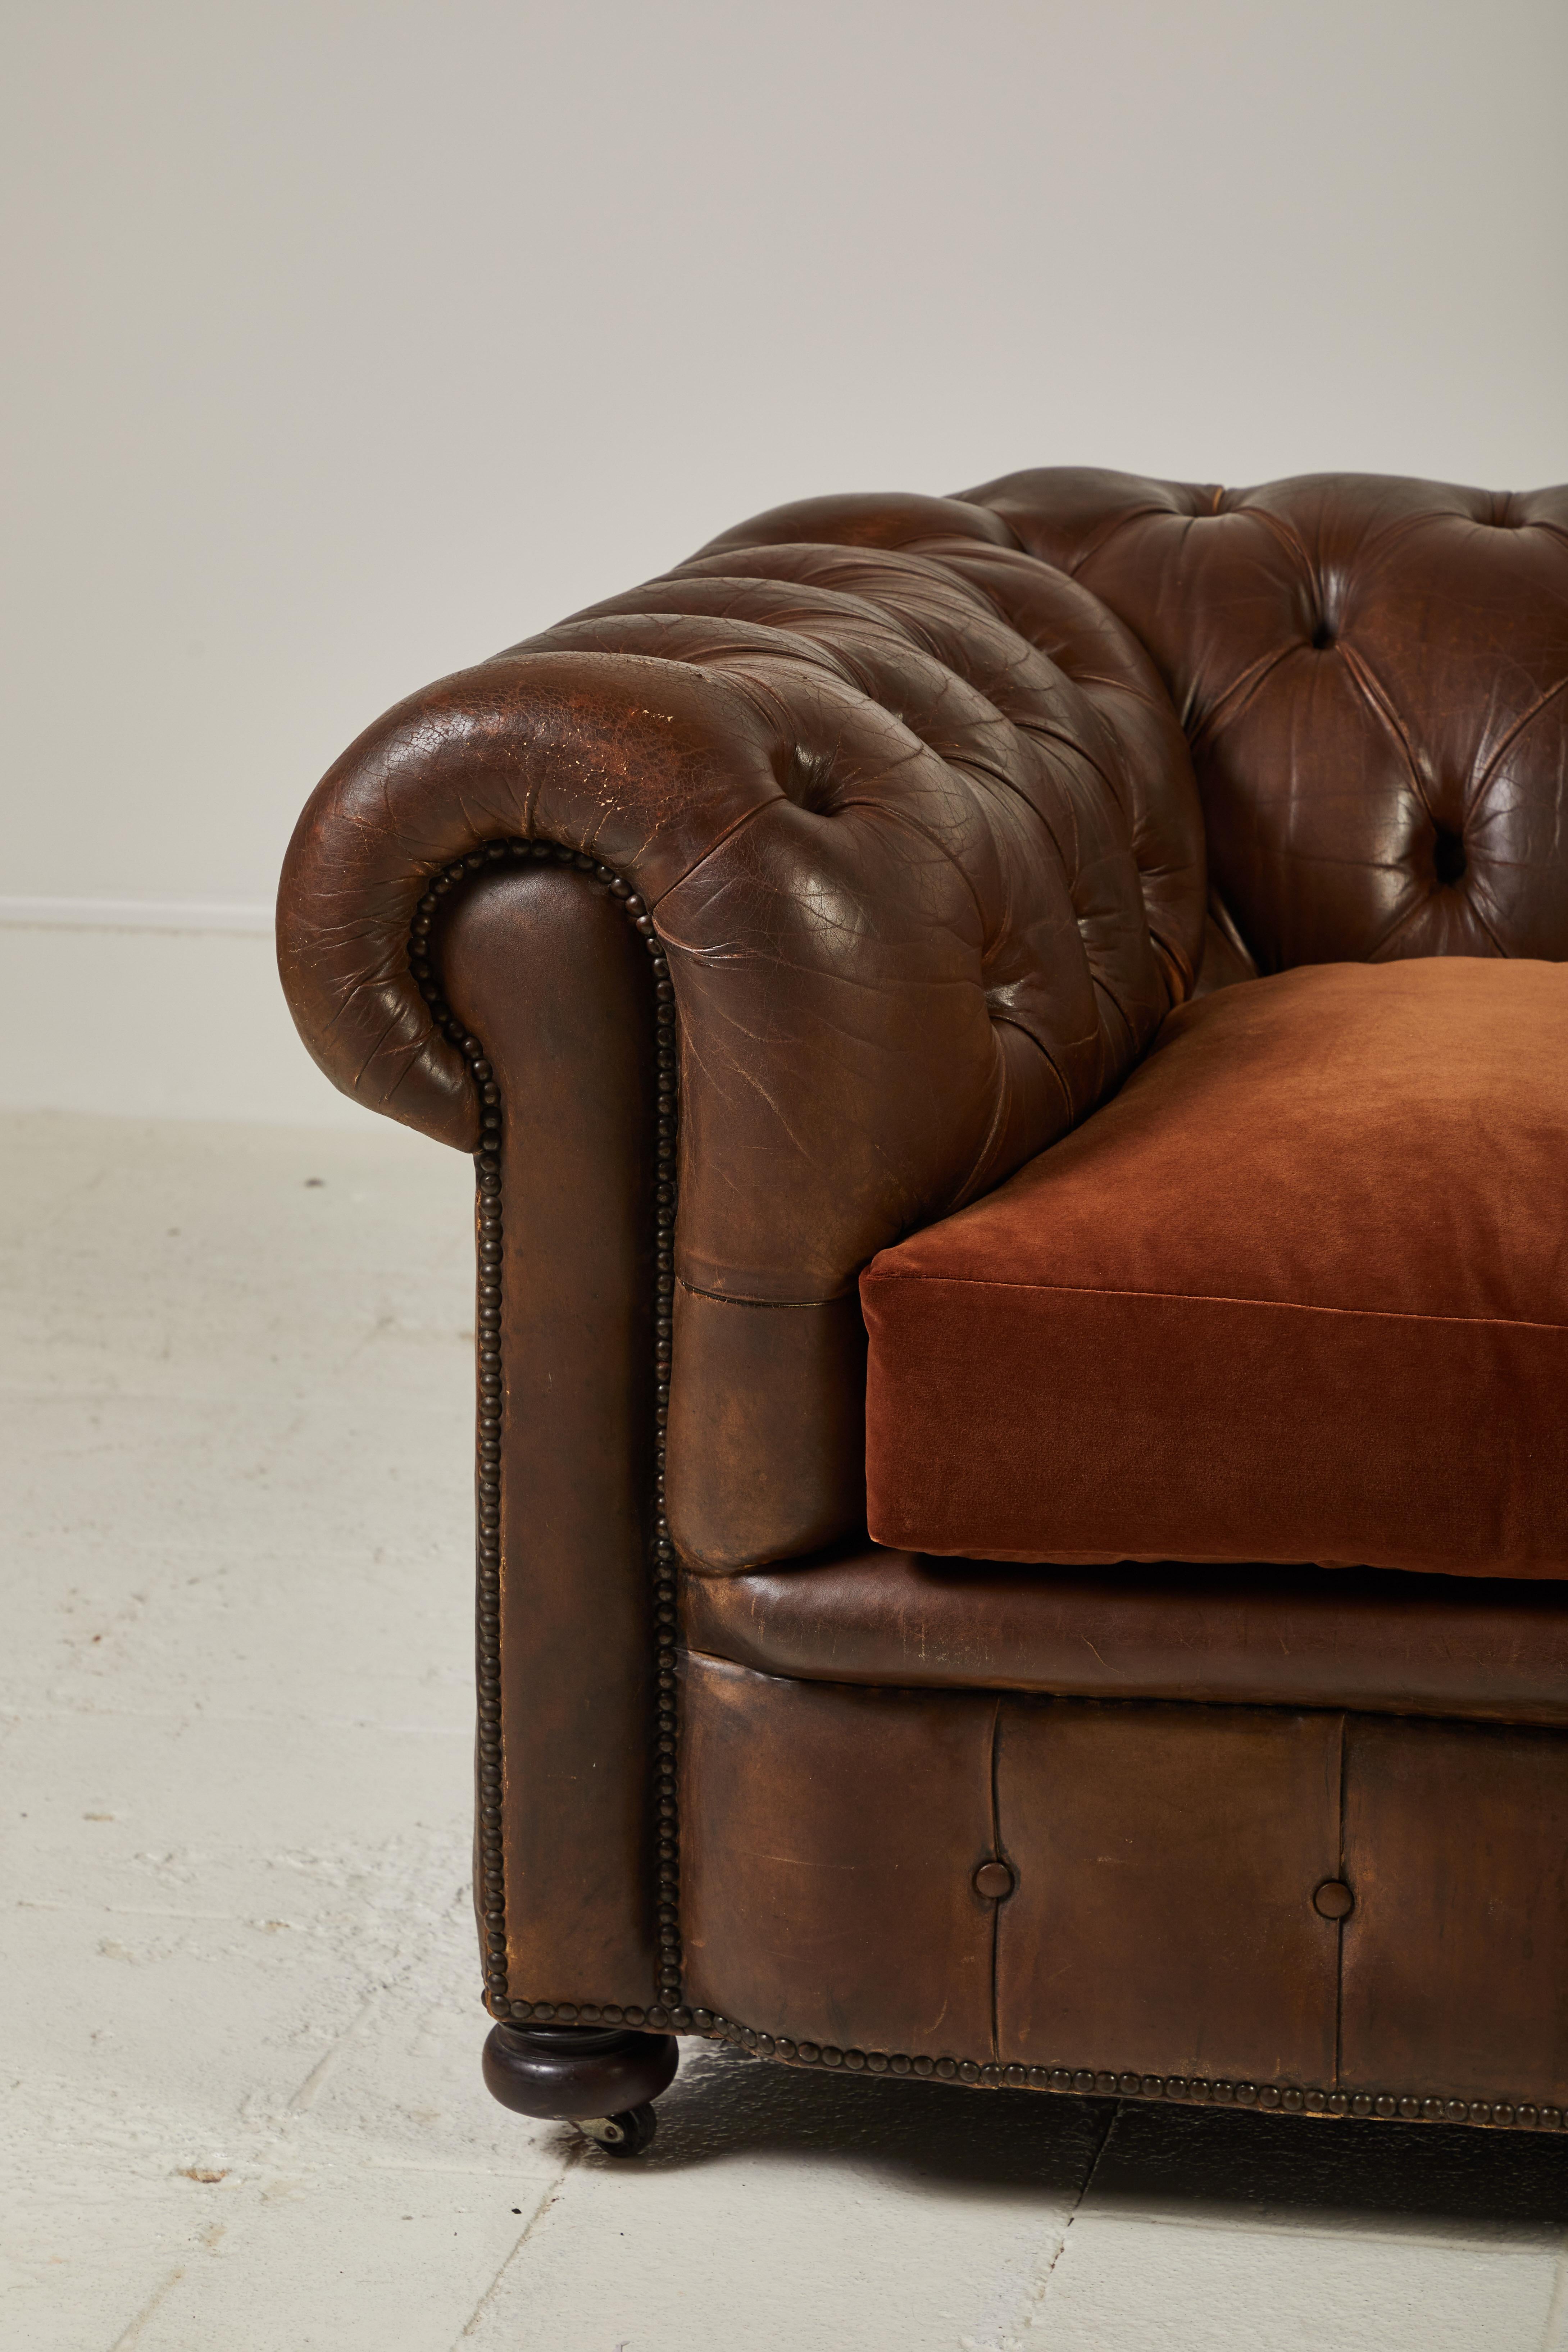 Beautifully aged brown leather chesterfield sofa with rolled arms finished with nail-heads, finished with newly constructed brown velvet cushions.